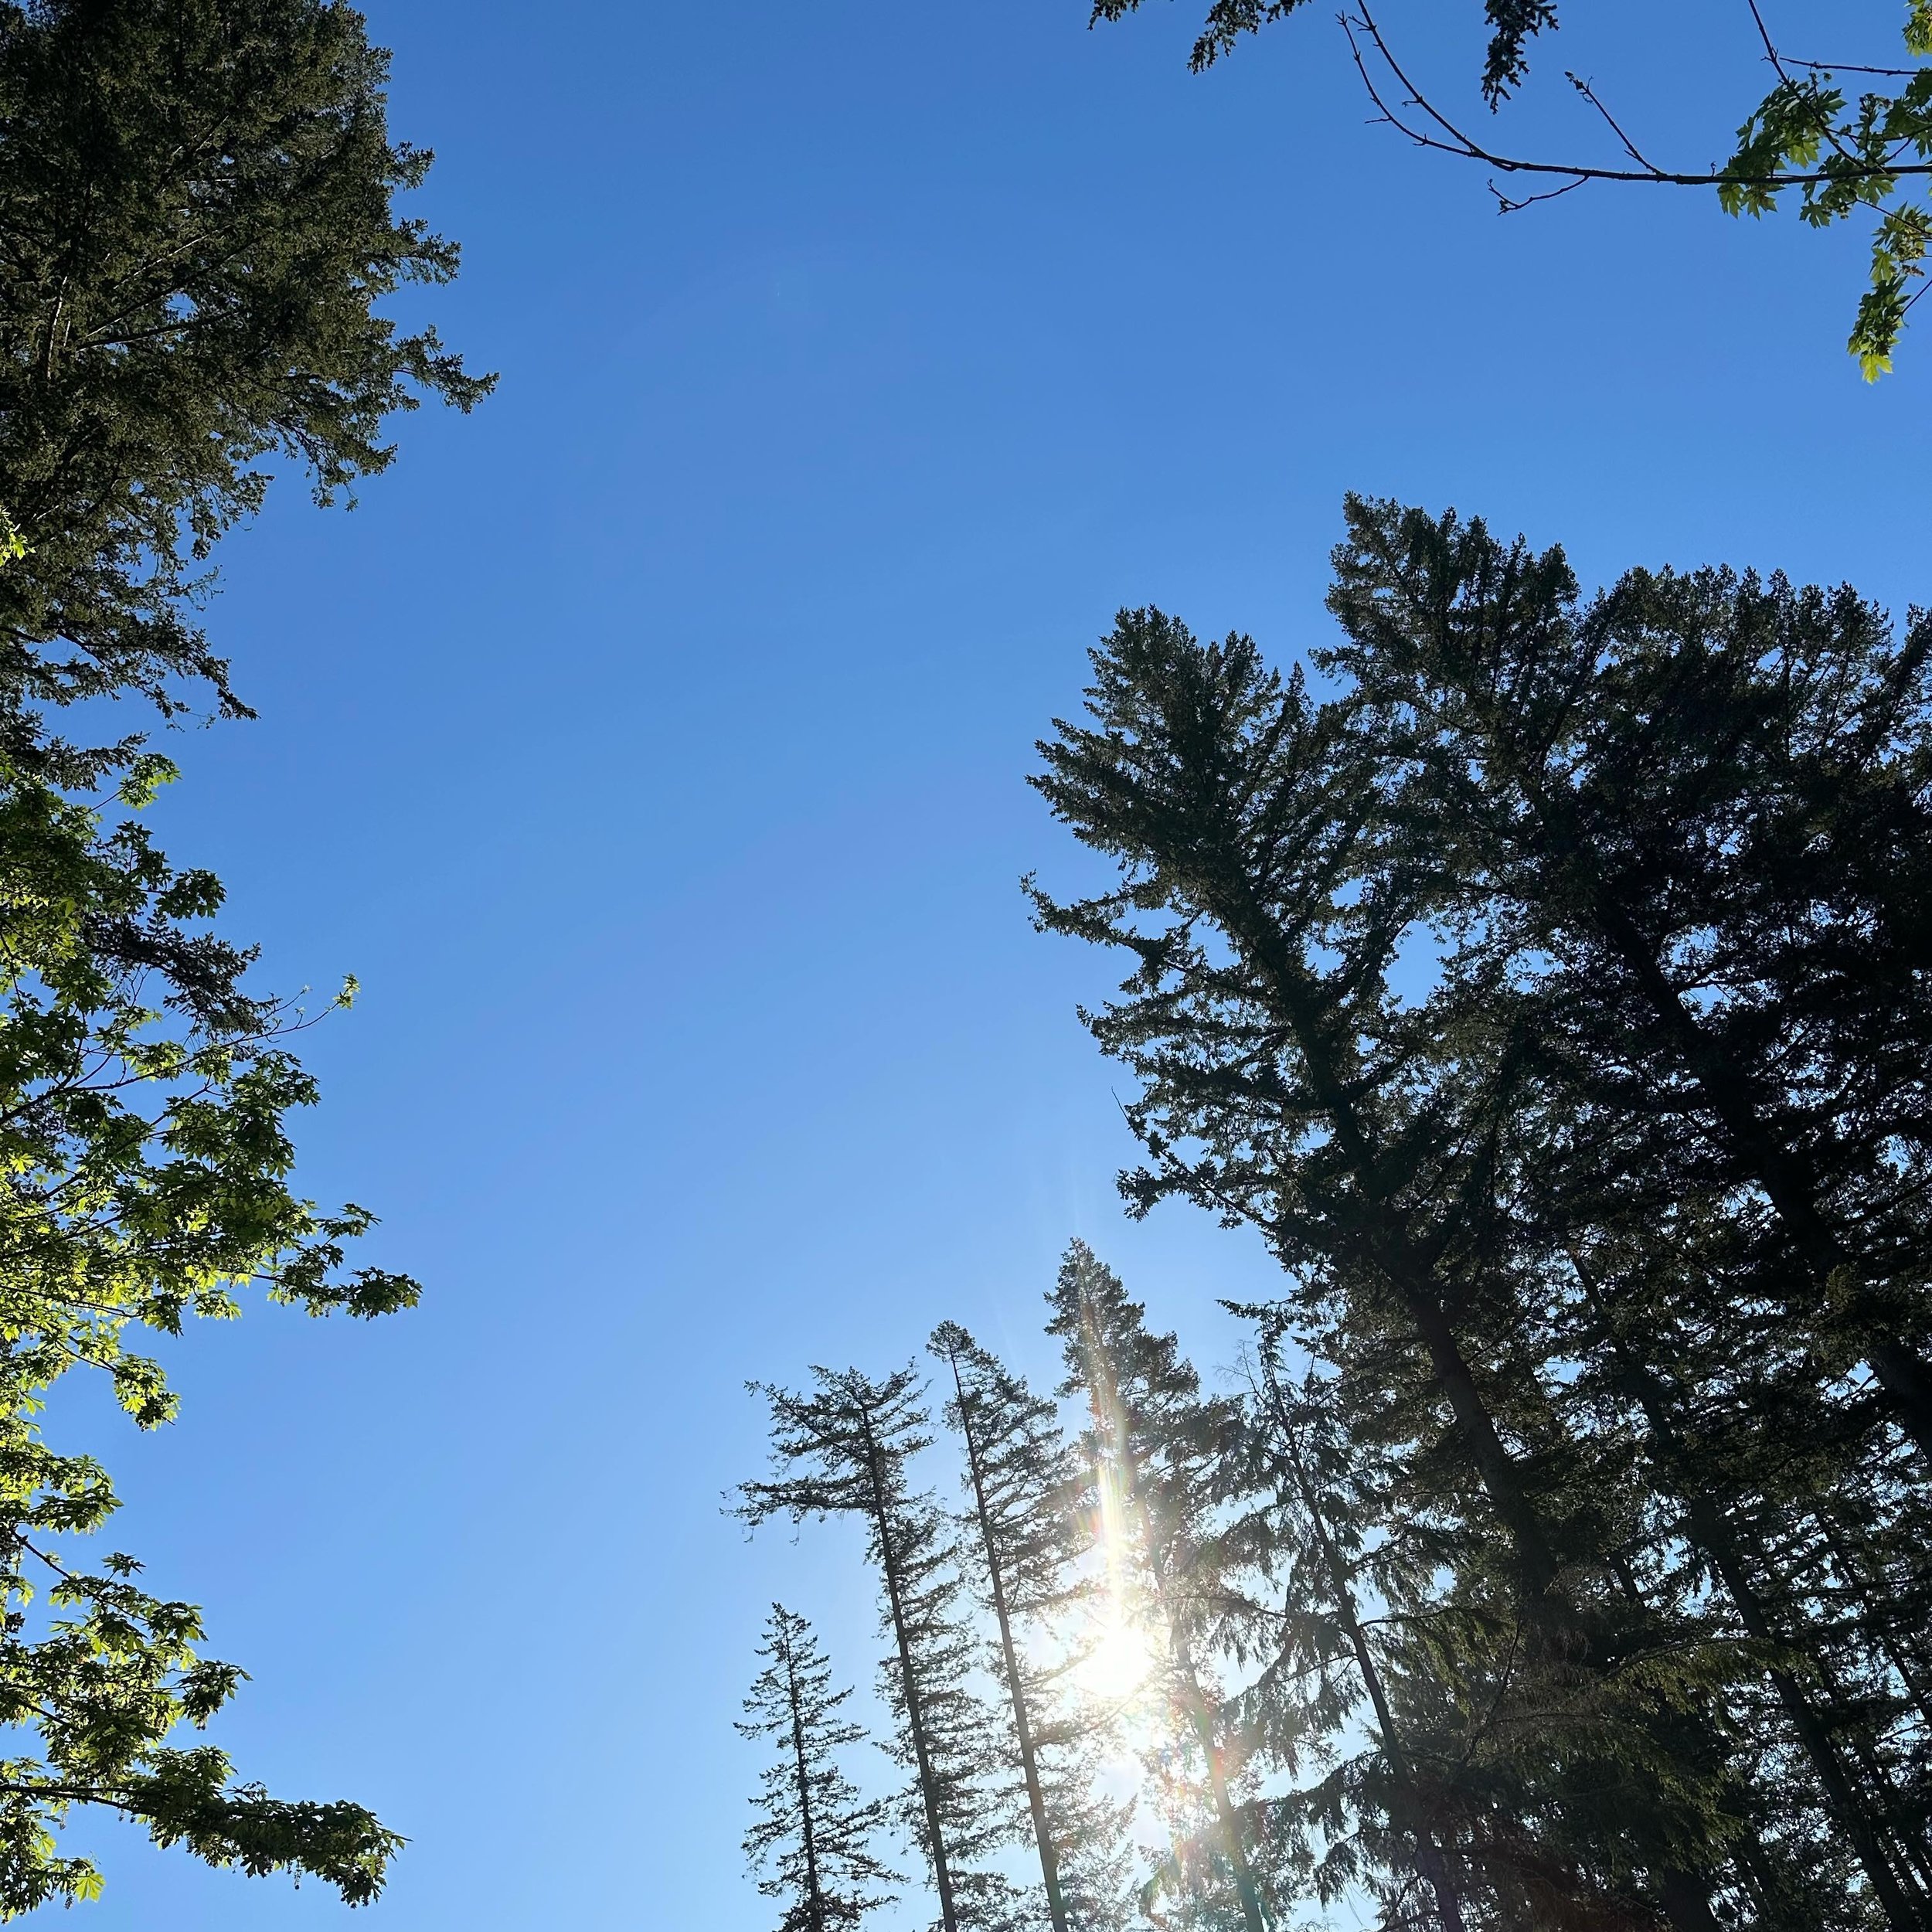 This is rare 80 and sunshine in the PNW, have a day @maplevalleyfarmersmarket ! If you want northern lights, keep scrolling&hellip;
.
#thesaturdayplacetobe #maplevalleyfarmersmarket  #farmersmarket #shoplocal #shopsmallbusiness
#shopsmall
#styksmokeh